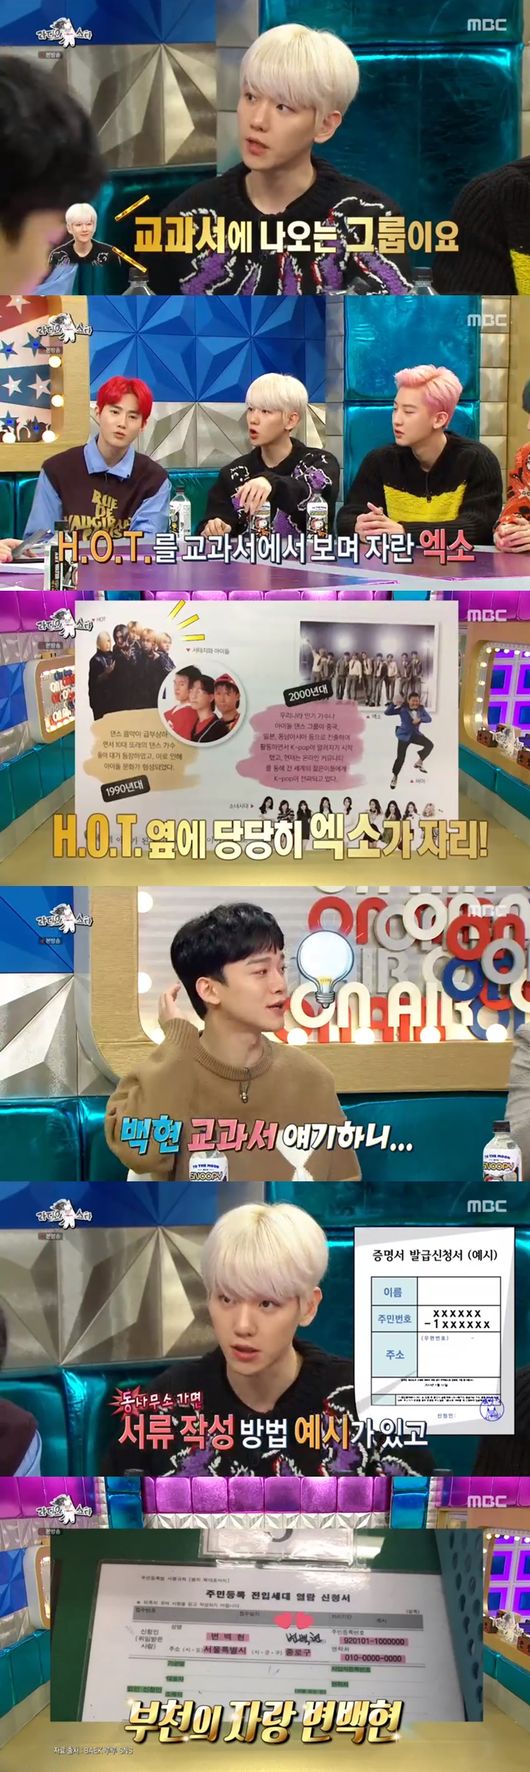 Sehun of the group EXO caught the eye by revealing that his name was to be set.In MBC Radio Star broadcasted on the last 4 days, EXO members appeared as a special feature of EXO Radio Star.I wanted to be a group in textbooks, and I had a HOT in the textbooks I saw, but now Im in the textbooks, said Baekhyun.When you go to the government office, there is a name for Baekhyun, Chen said.I am from Bucheon, and when I go to a government office in Bucheon, I have a name for the example, said Baekhyun.I had one superpower at my debut, Kai said, referring to his debut. It was a repertoire to show. But we could not show it.But after five years, I naturally understood it. Sehun confessed that he wanted to avoid Lee Soo-mans choice: When the name of guardian first came out, the members laughed, not even the guardian angel, and what was it?But he told me to set up a name. Baekhyun said, I also heard that the name was Guan Yu.Meanwhile, Chanyeol said: I was impressed by Dio recently, I was lonely when I was performing silent for a month because of my neck, but Kyungsu came home a lot.I just came and played my cell phone game. Kim Gulra said, I just went to rest. Chanyeol said, The light water often does the jujitsu, and one day the light water can not come out if I put a choke technique on me.So I asked him to try it once, and he put on a choke technique, and his consciousness was blurred. Chanyeol said, I can not tell you to stop because of self-esteem, and my consciousness became increasingly cloudy.At that time, the ankle of the light water turned and I could not walk for two months. Chanyeol is really competitive, and even playing basketball is so bad that he gets hurt, Sehun said, so Chanyeol said, Thats an old story.I have been saving my body through silent practice. I still play basketball these days, but I choose a position where I do not get hurt. Mr. Lee Soo-man likes to be a gag, Kai said.Baekhyun said, My title song was United Nations Village, and Lee Soo-man told me to go to United Nations Village and live.Kai laughed, saying, I honestly do not like it, so I do not read it at all.MBC Radio Star broadcast capture